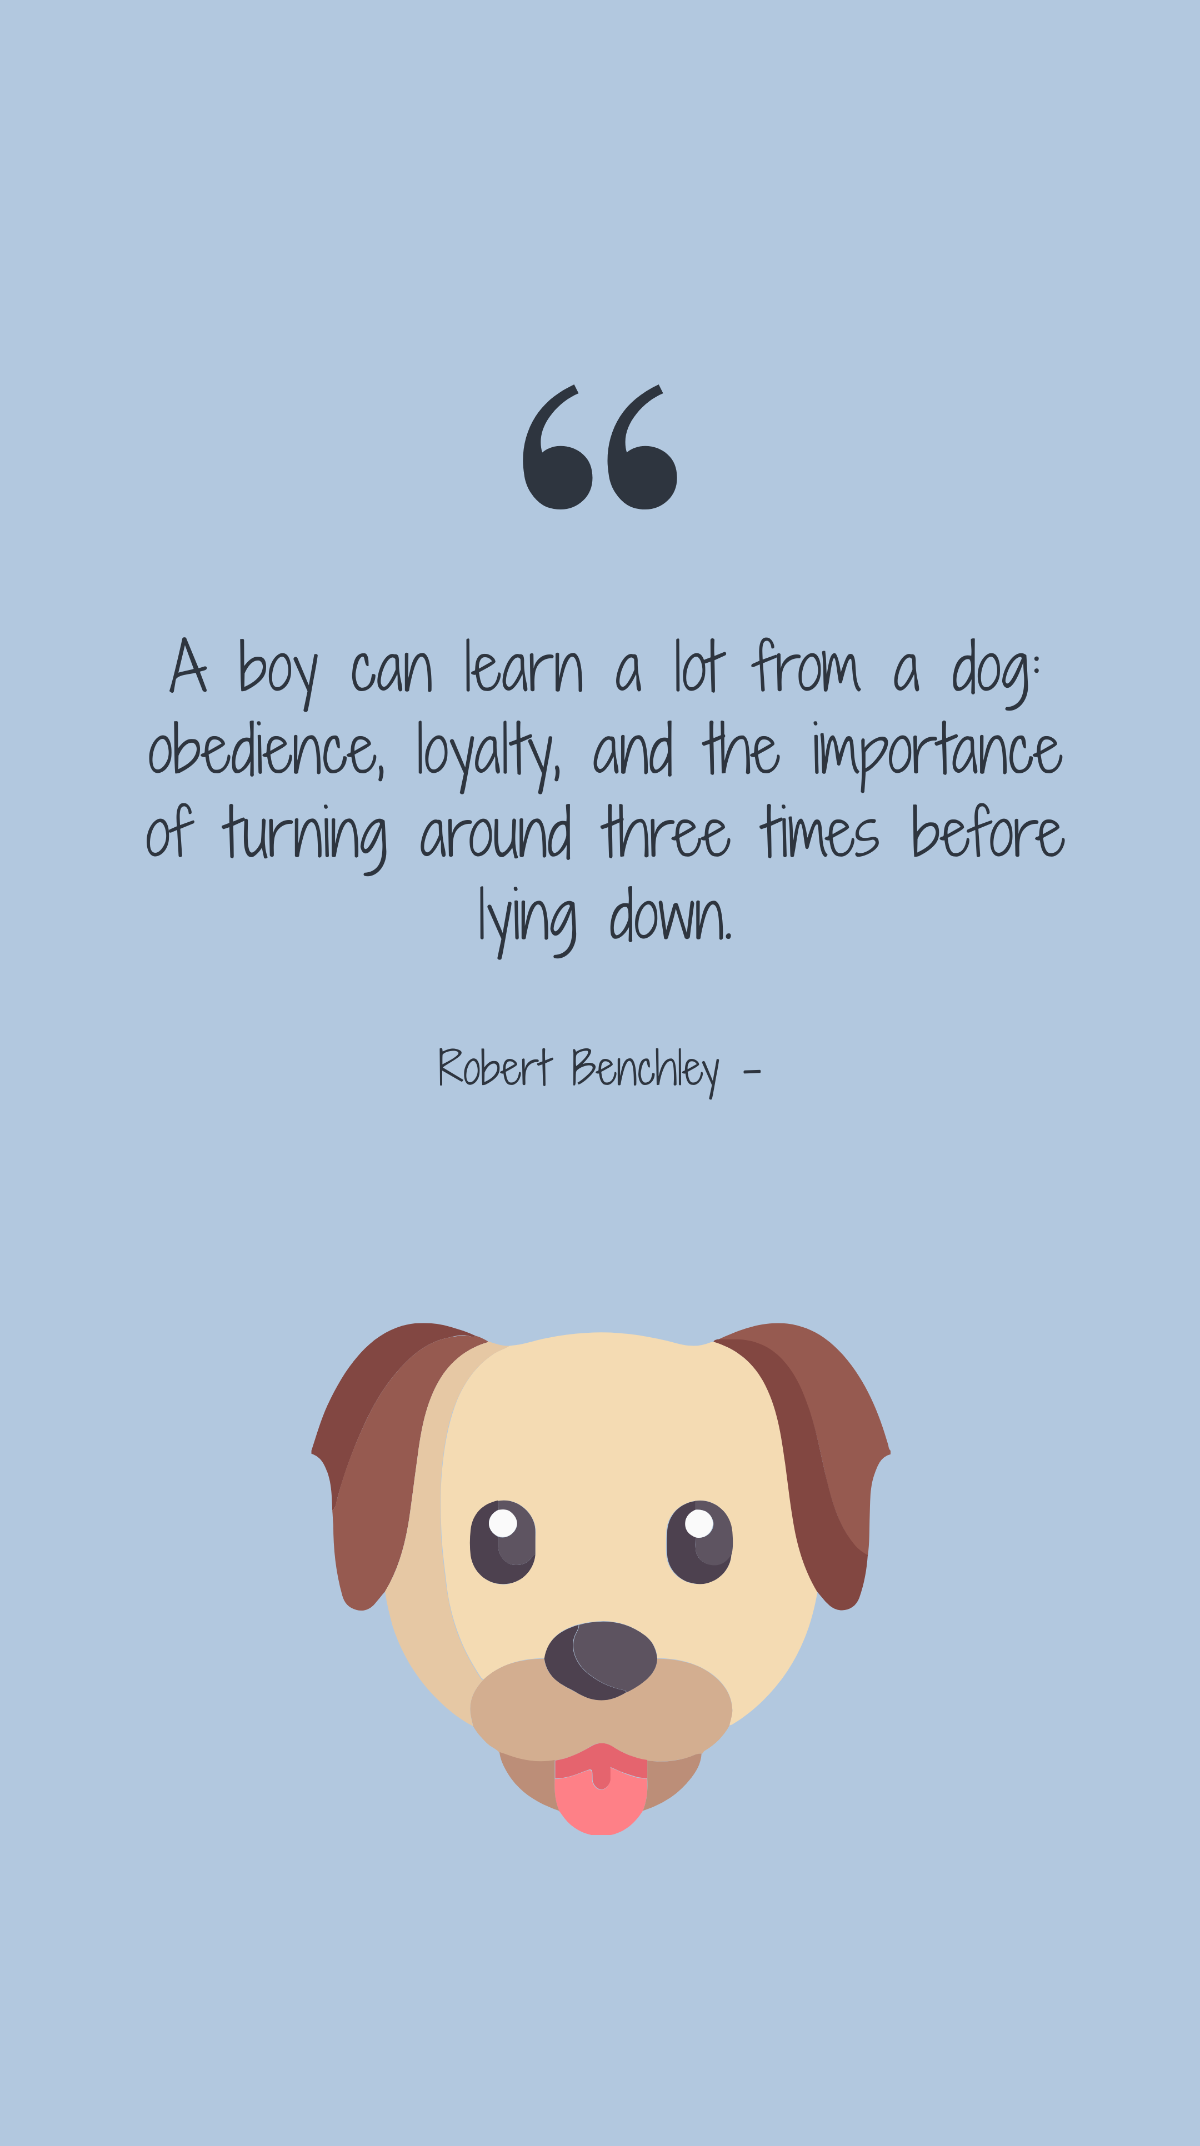 Free Robert Benchley - A boy can learn a lot from a dog: obedience, loyalty, and the importance of turning around three times before lying down. Template